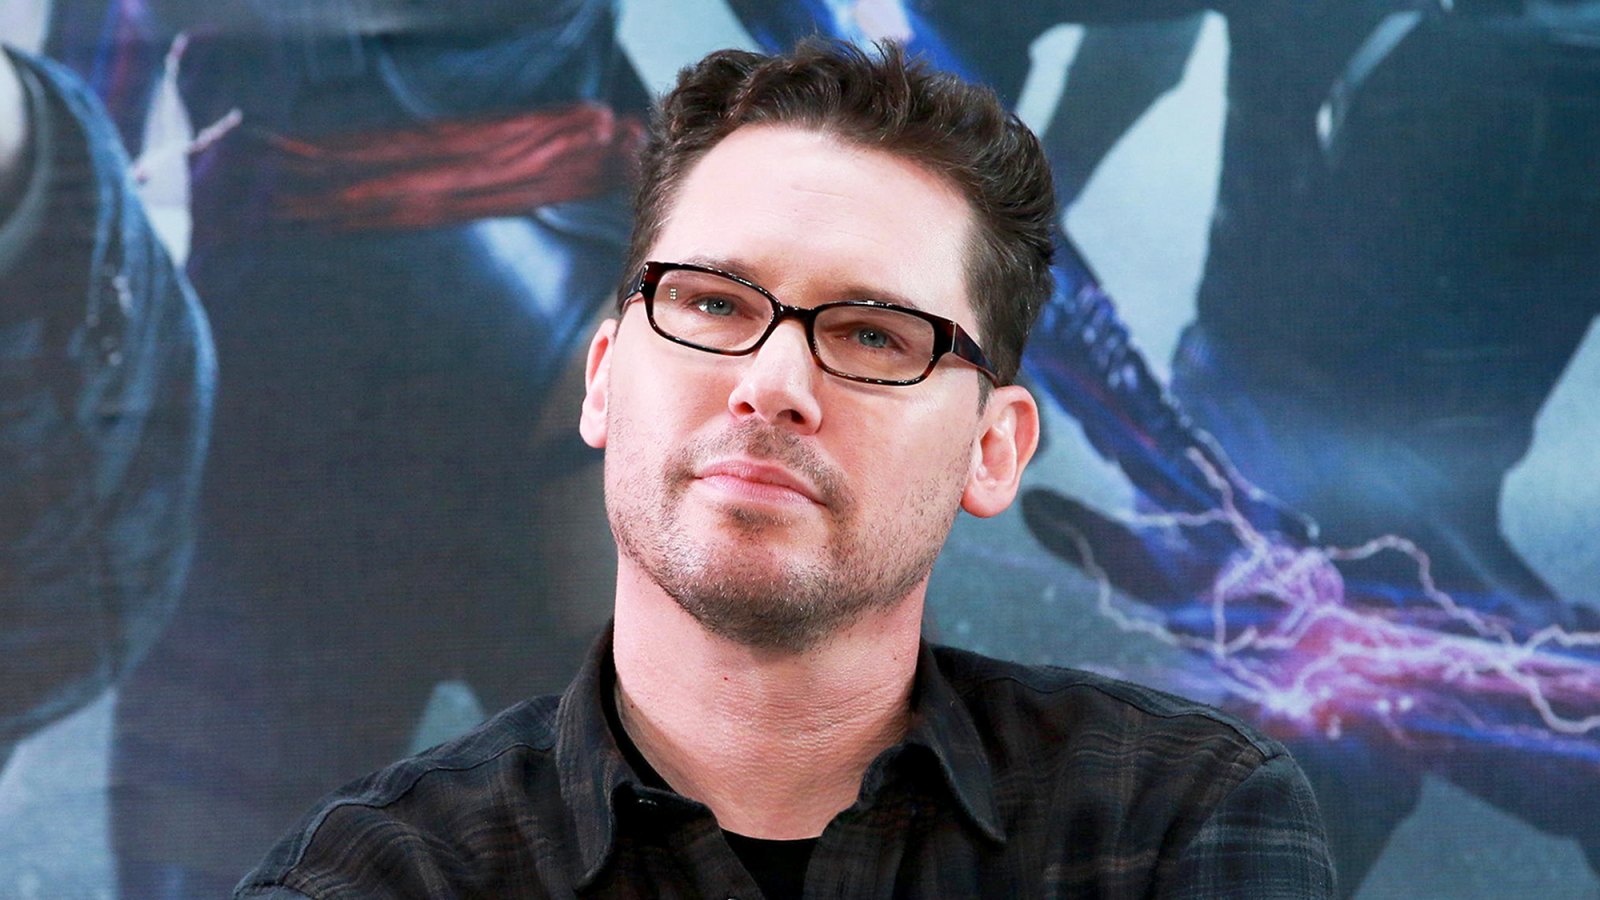 Bryan Singer attends Tsinghua campus visit for new movie "X-Men: Apocalypse" on May 18, 2016 in Beijing, China.